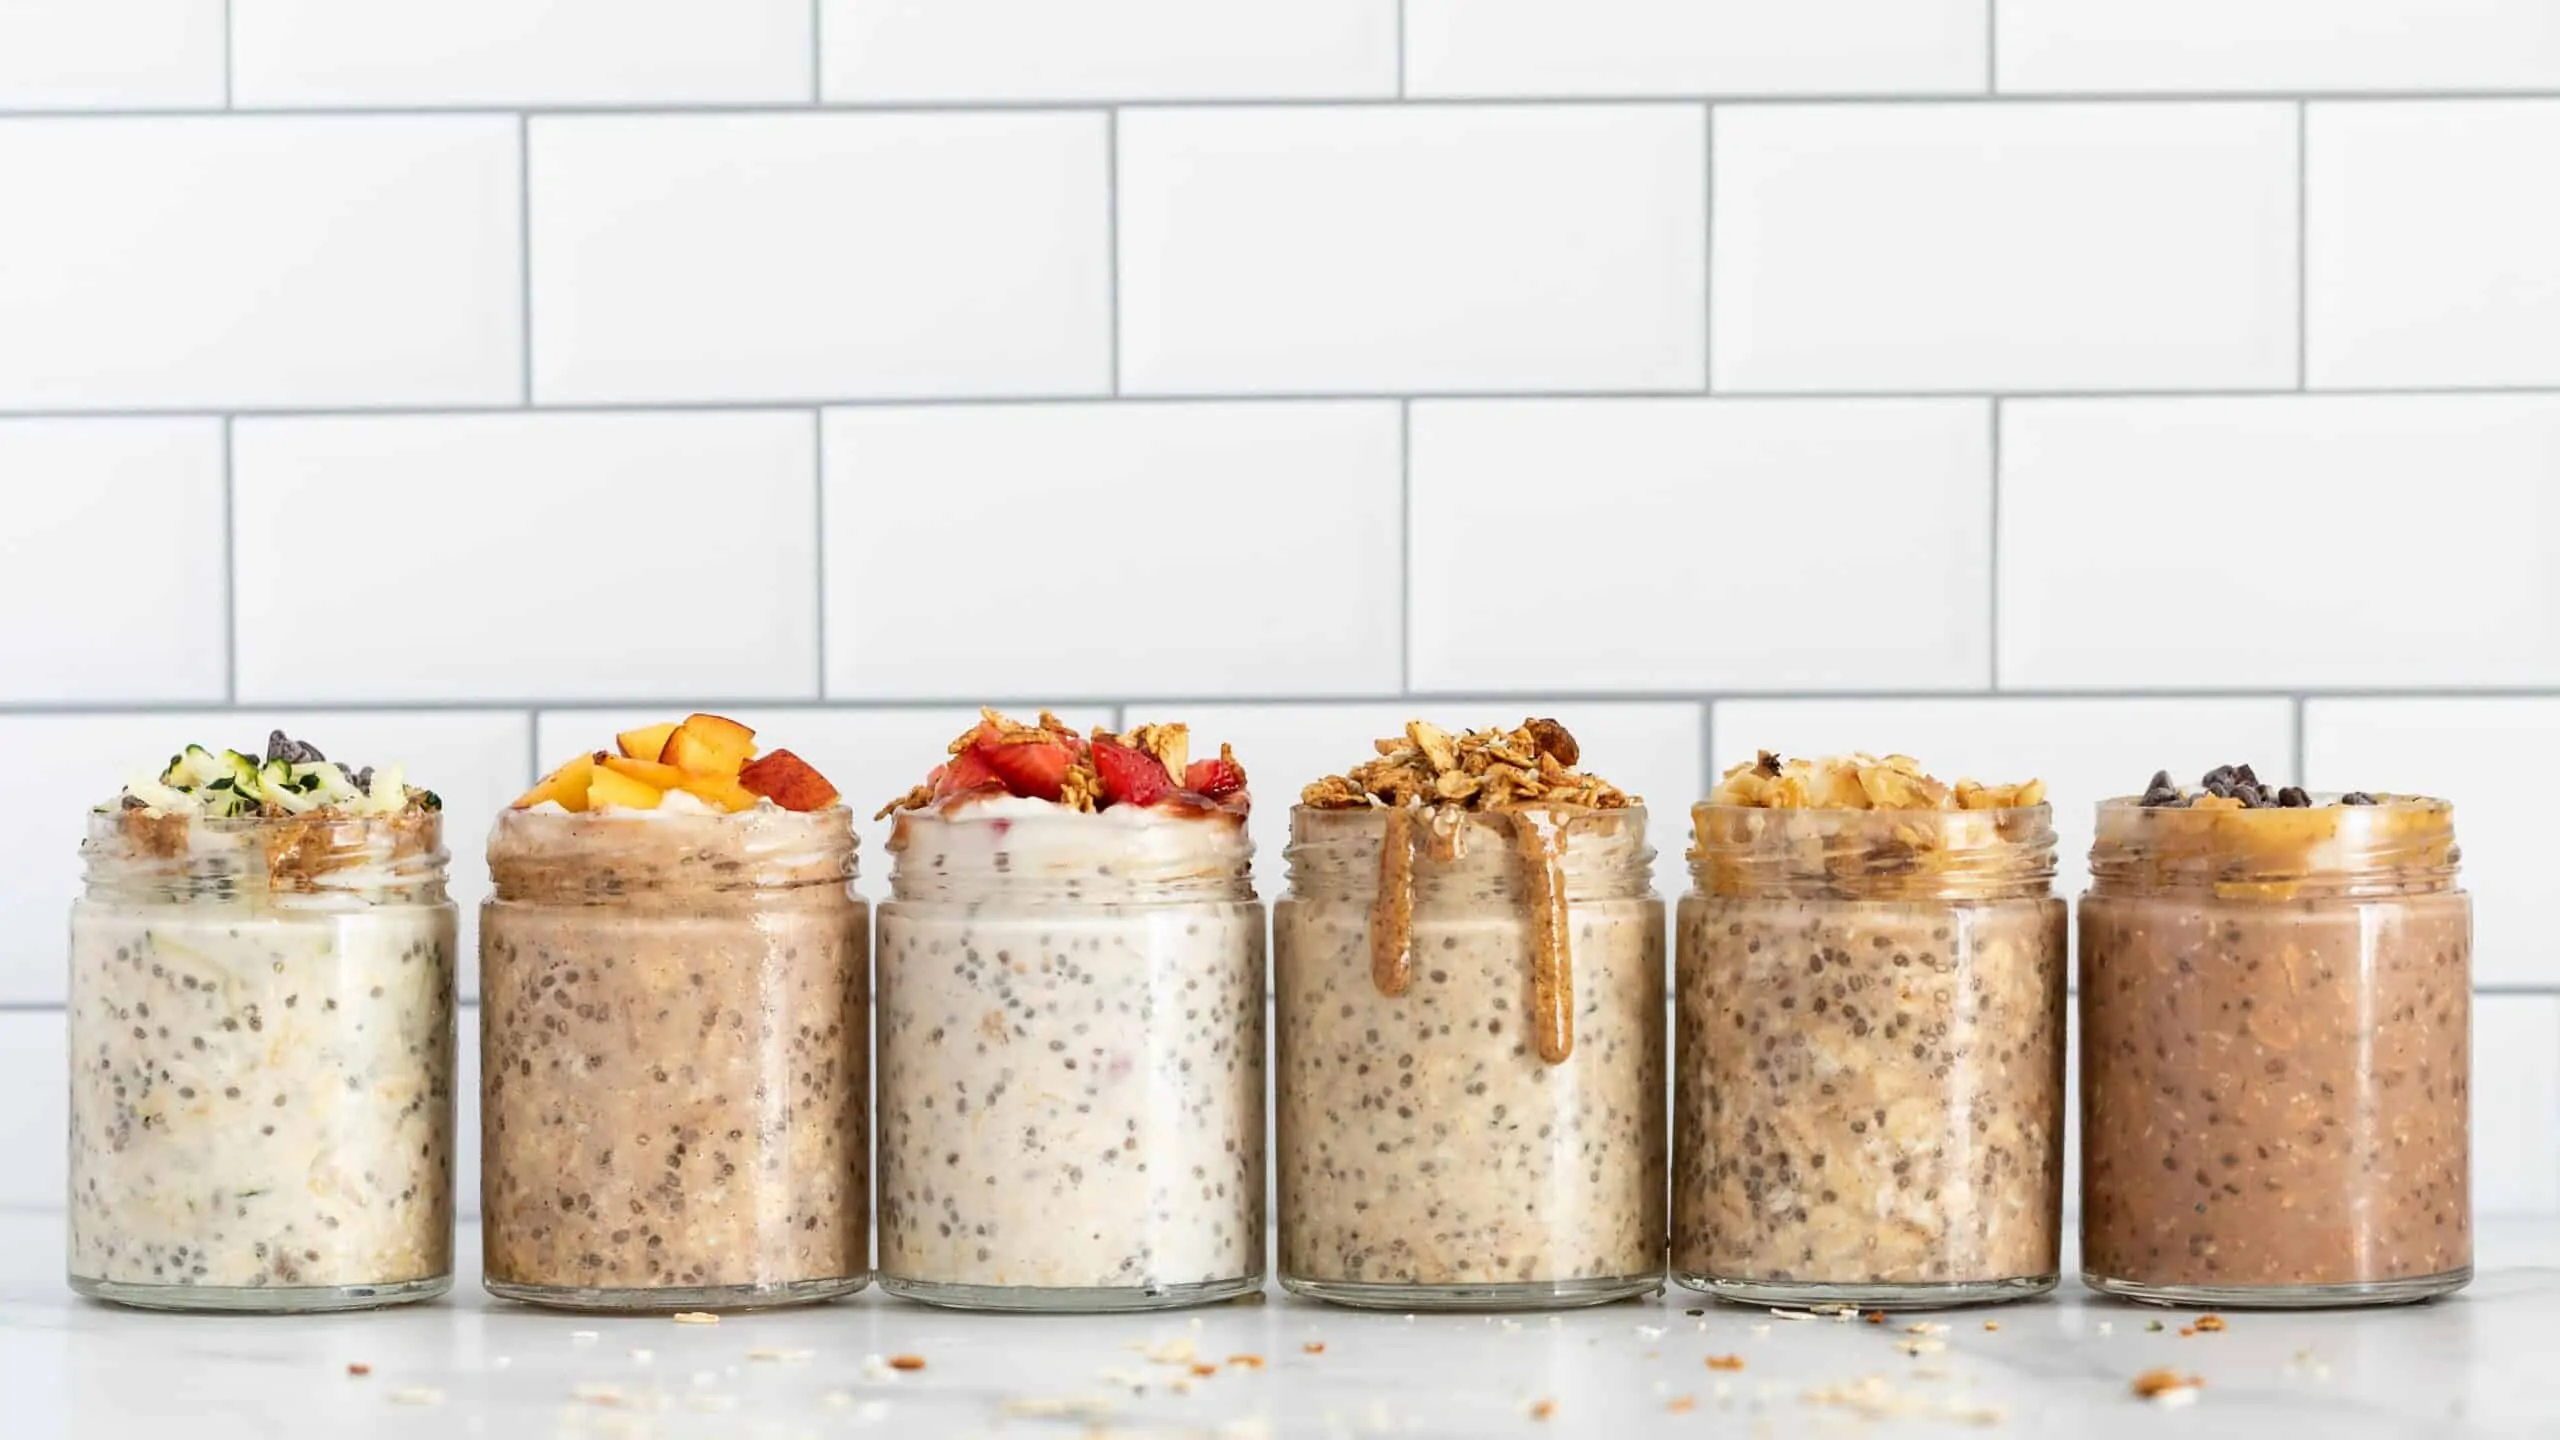 6 mason jars on a marble counter filled with overnight oats and various toppings